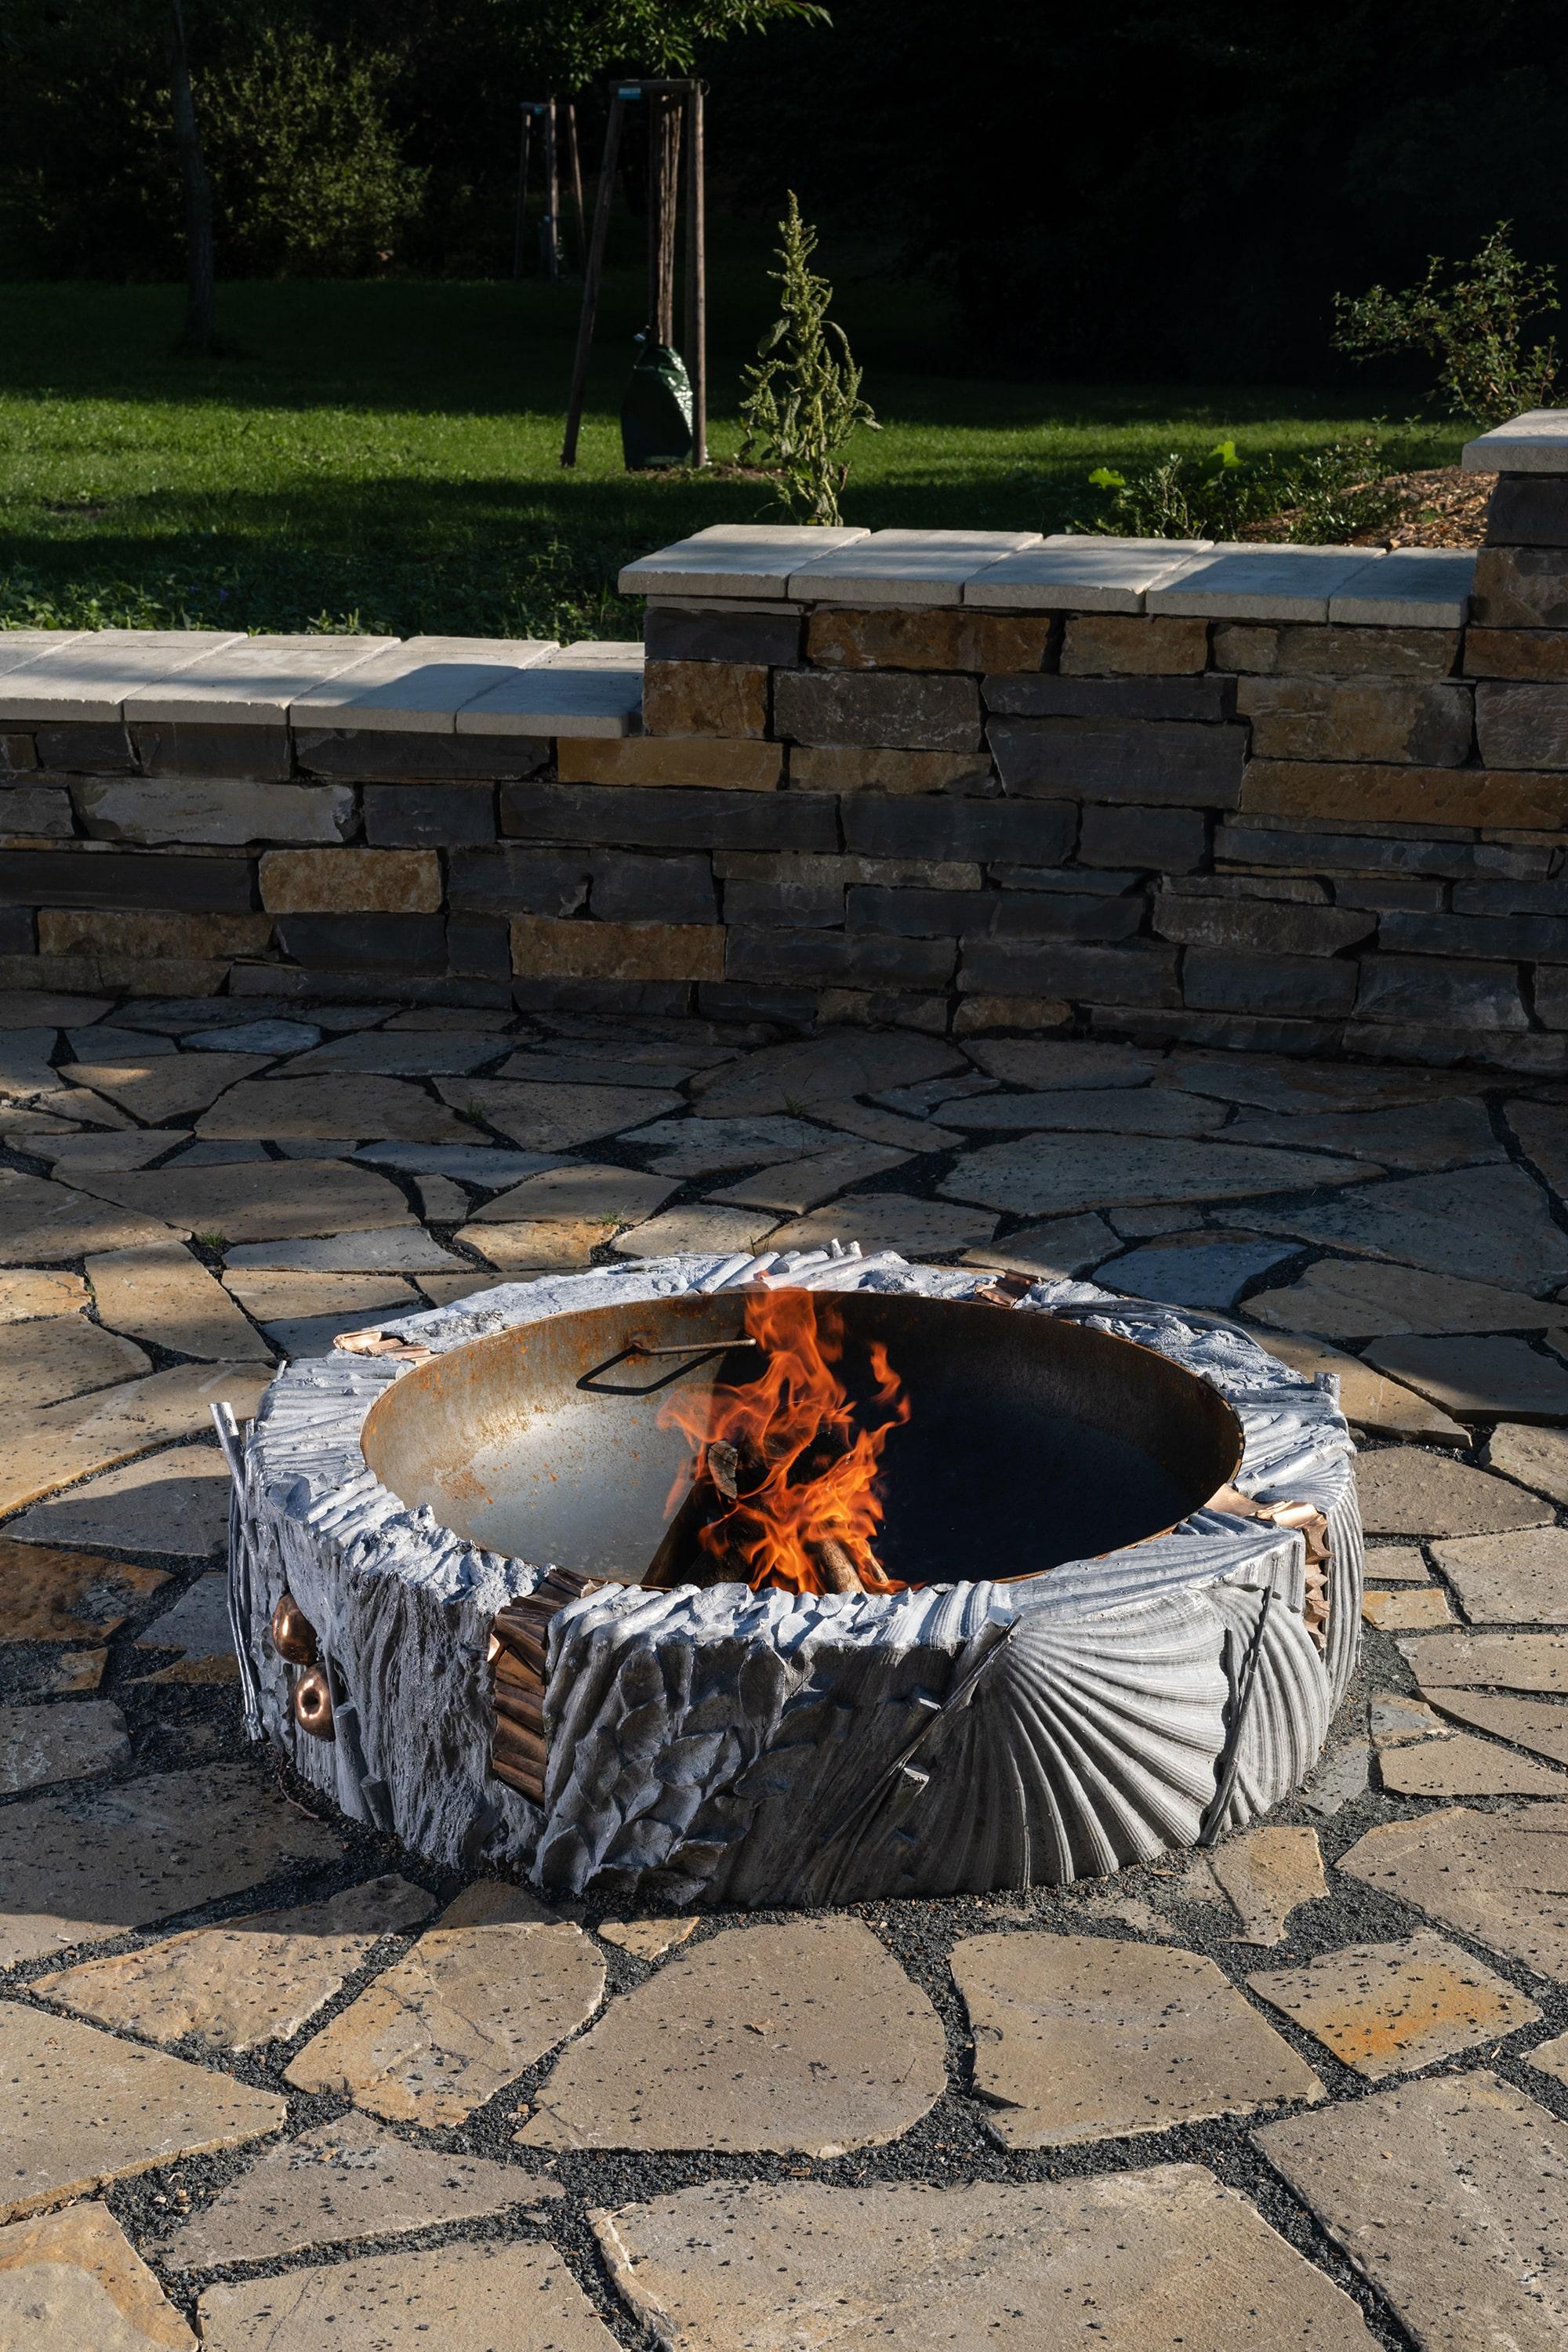 Fire Element is a work by Czech sculptor Ondřej Oliva. This work is both a sculpture and a working fire pit which can be installed in outdoor and indoor settings. It has been designed to withstand all environmental conditions, making it perfect for